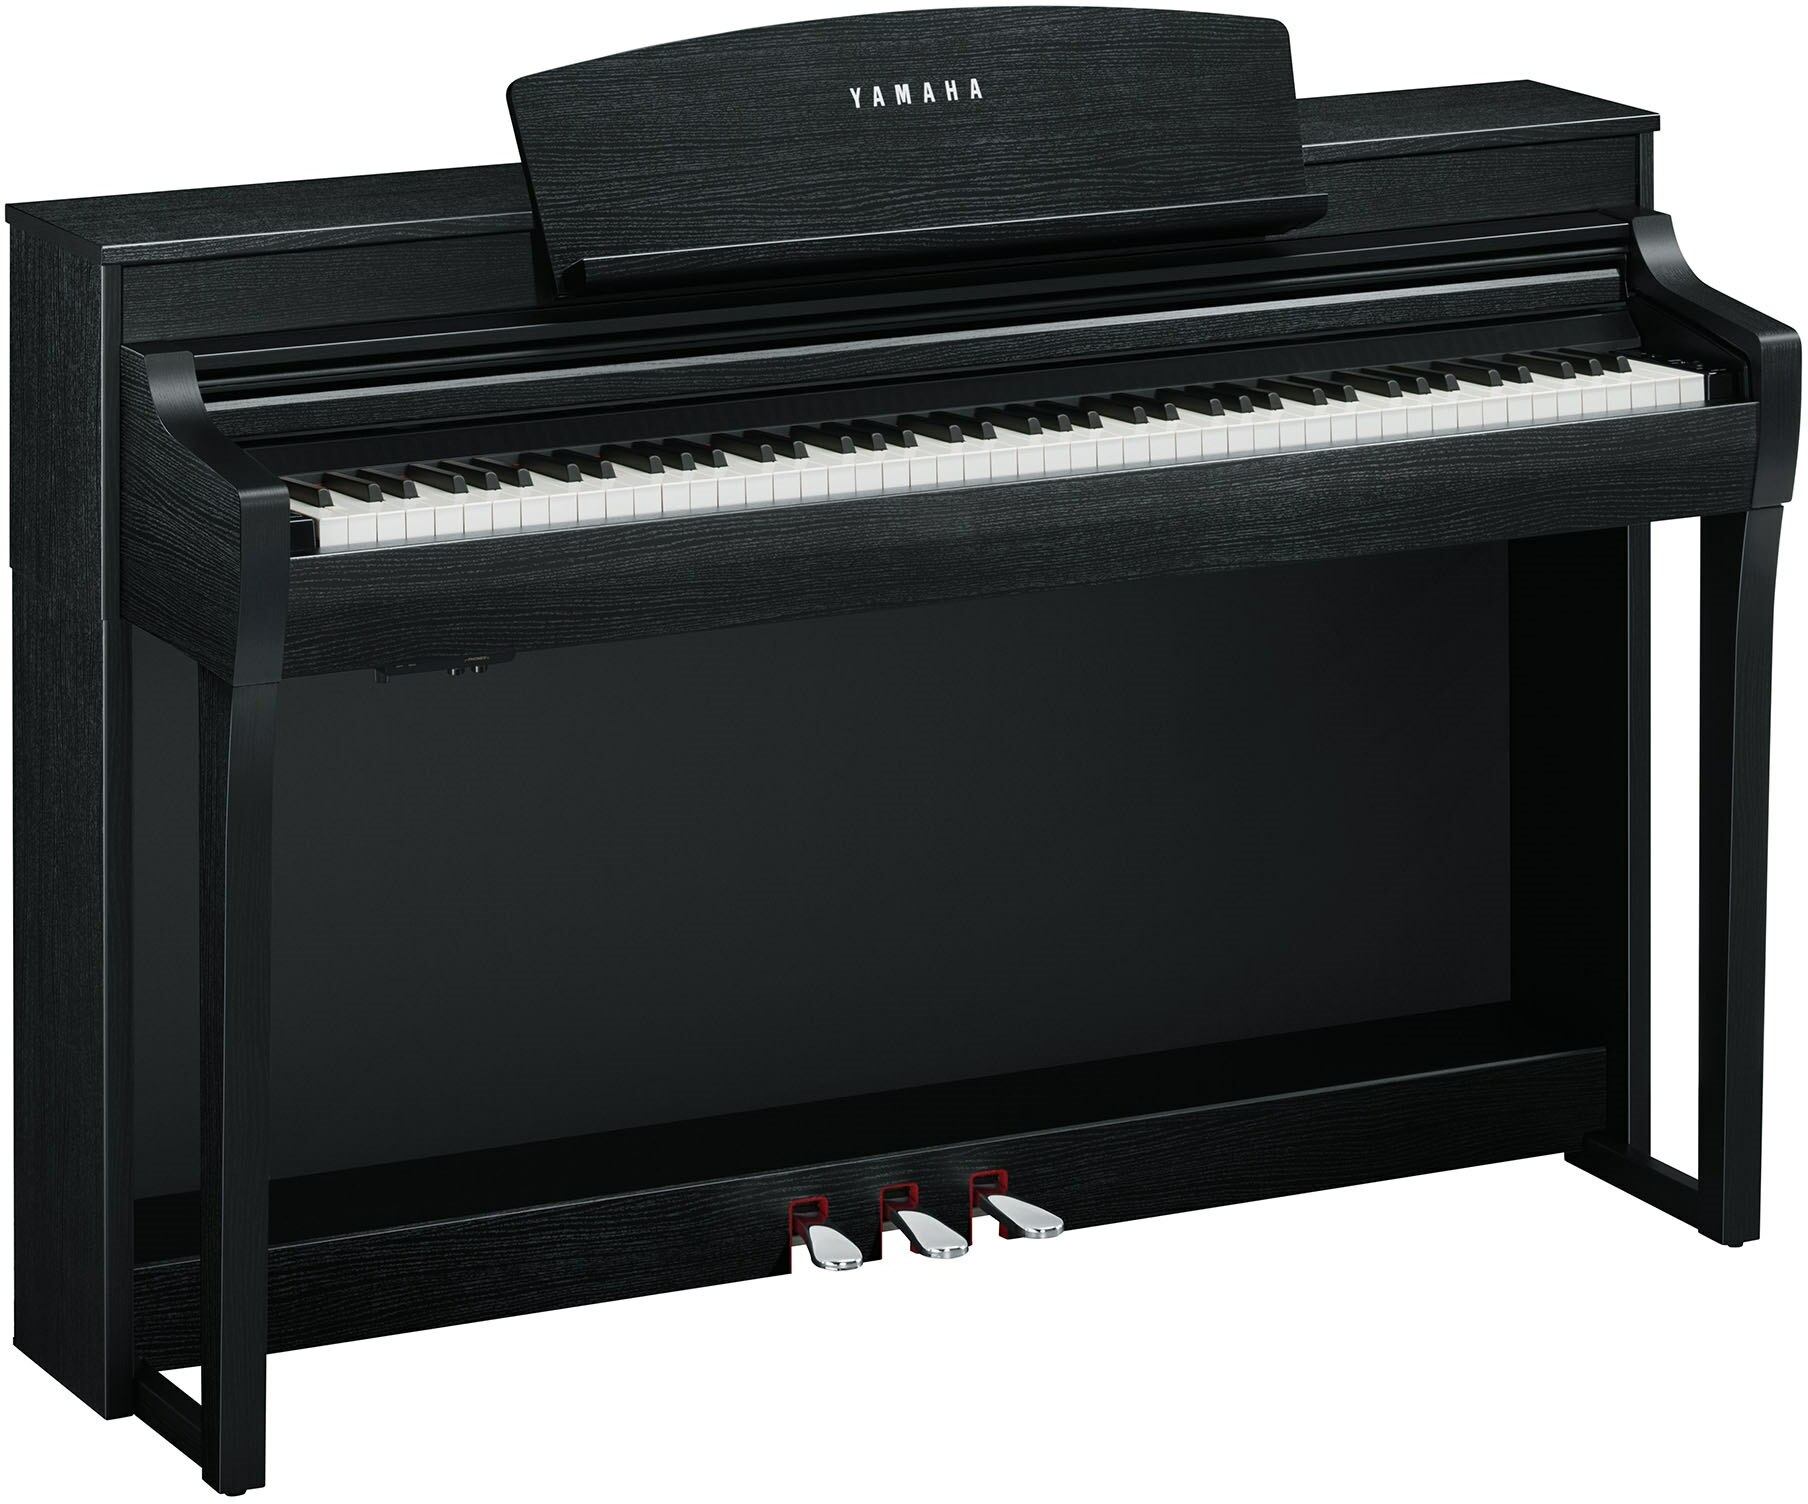 Yamaha Csp-255 B - Digital piano with stand - Main picture